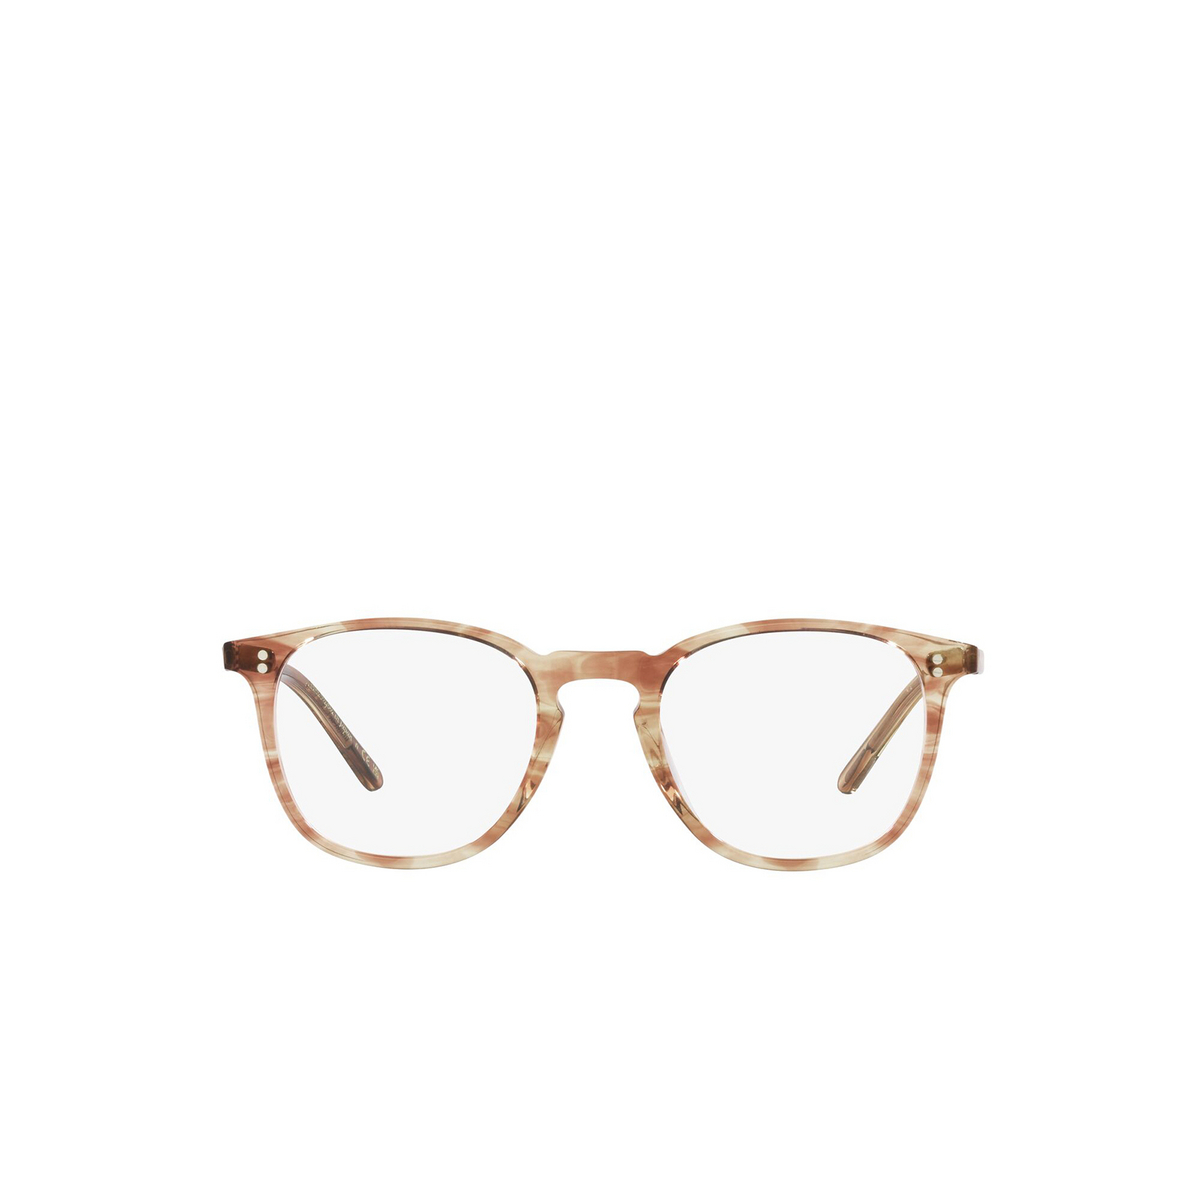 Oliver Peoples FINLEY 1993 Eyeglasses 1744 Tortoise - front view